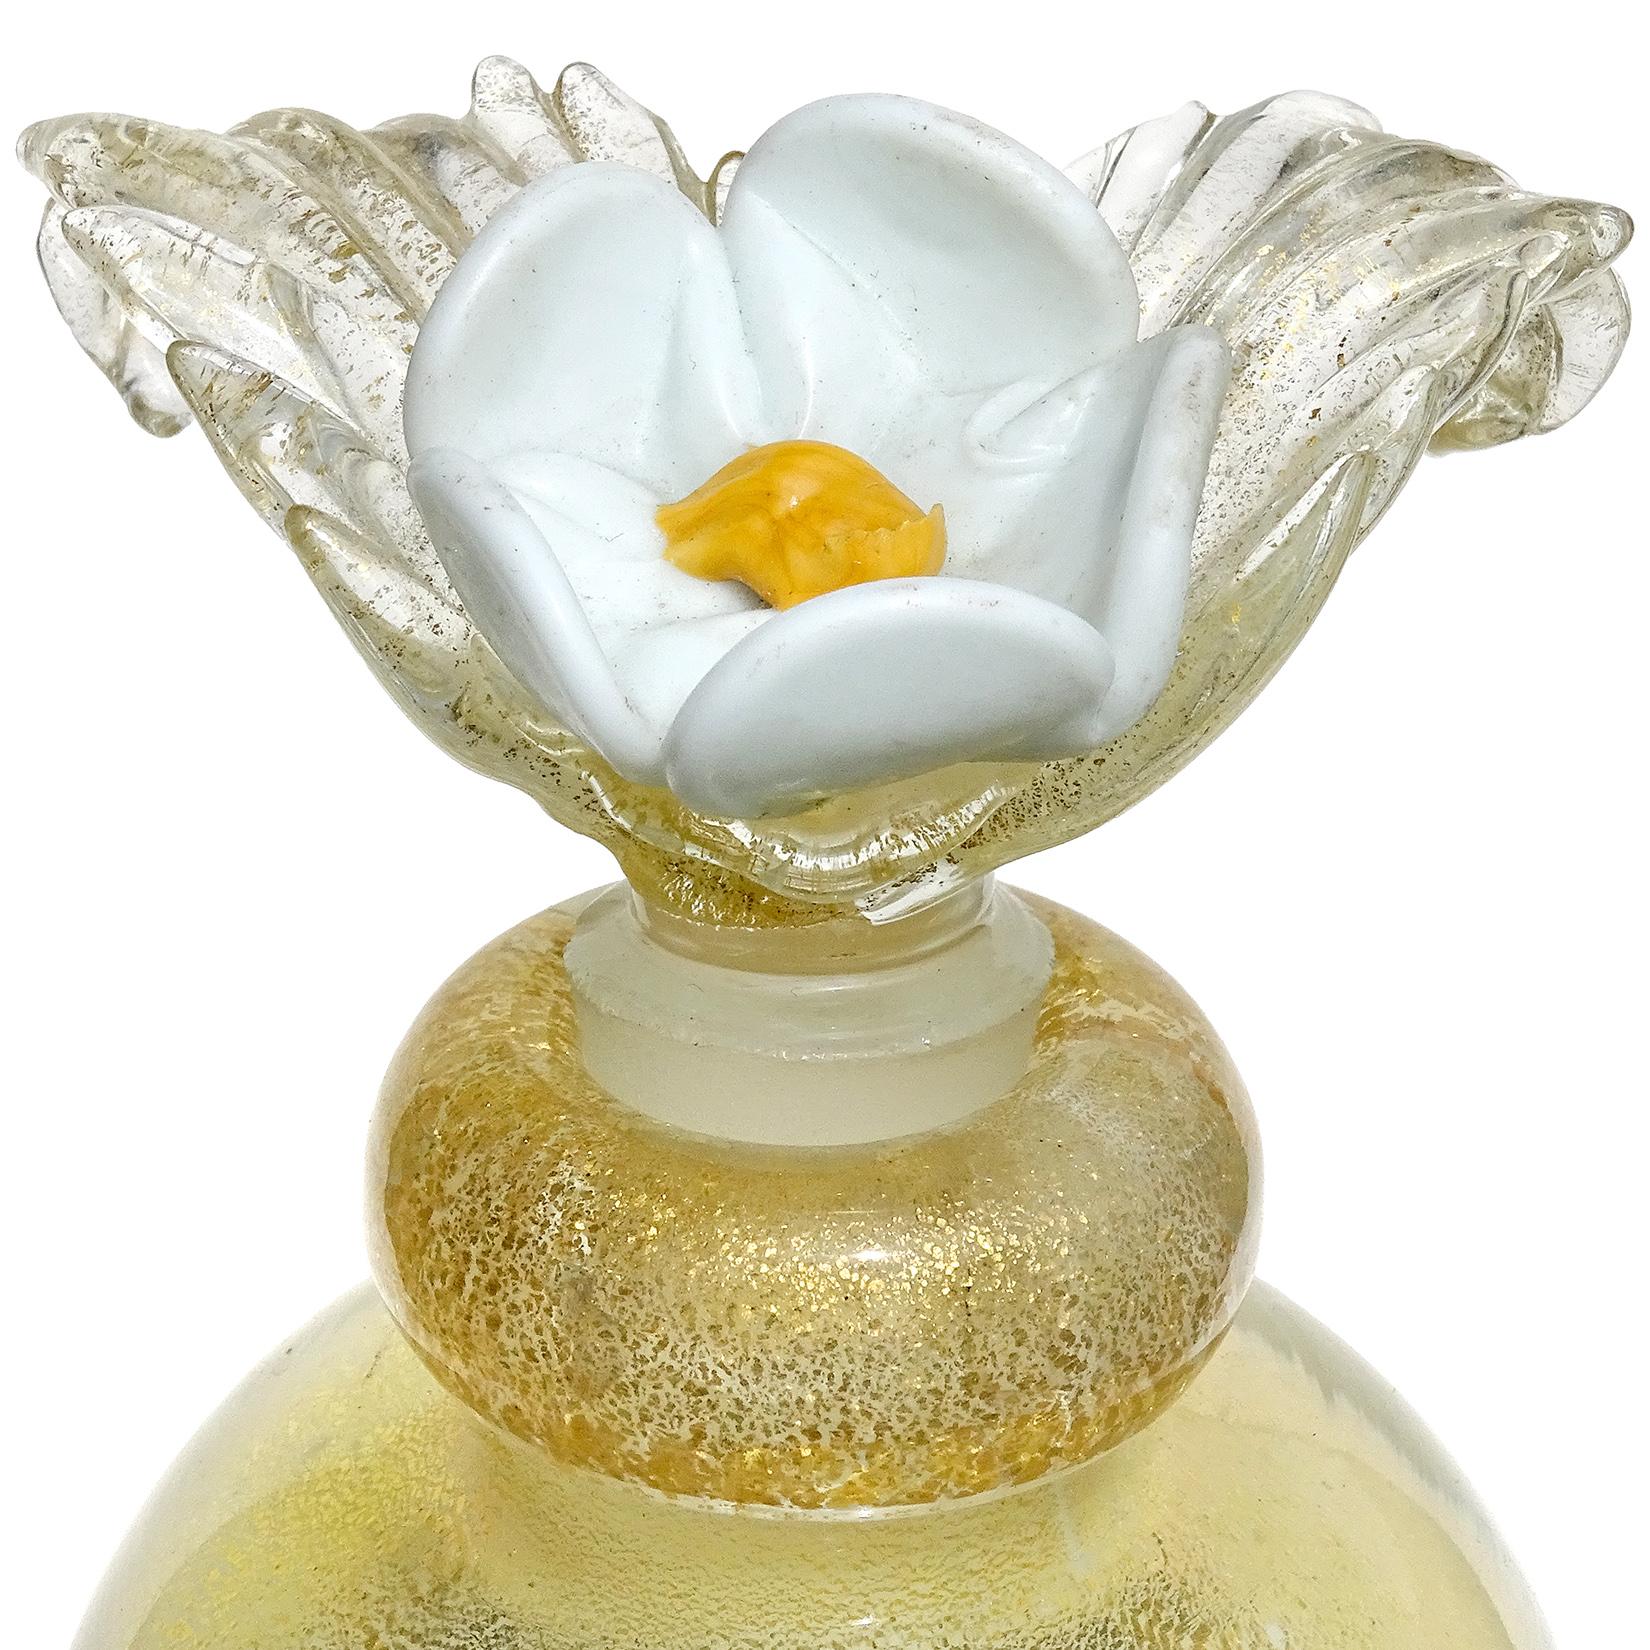 perfume bottle with white flower on top